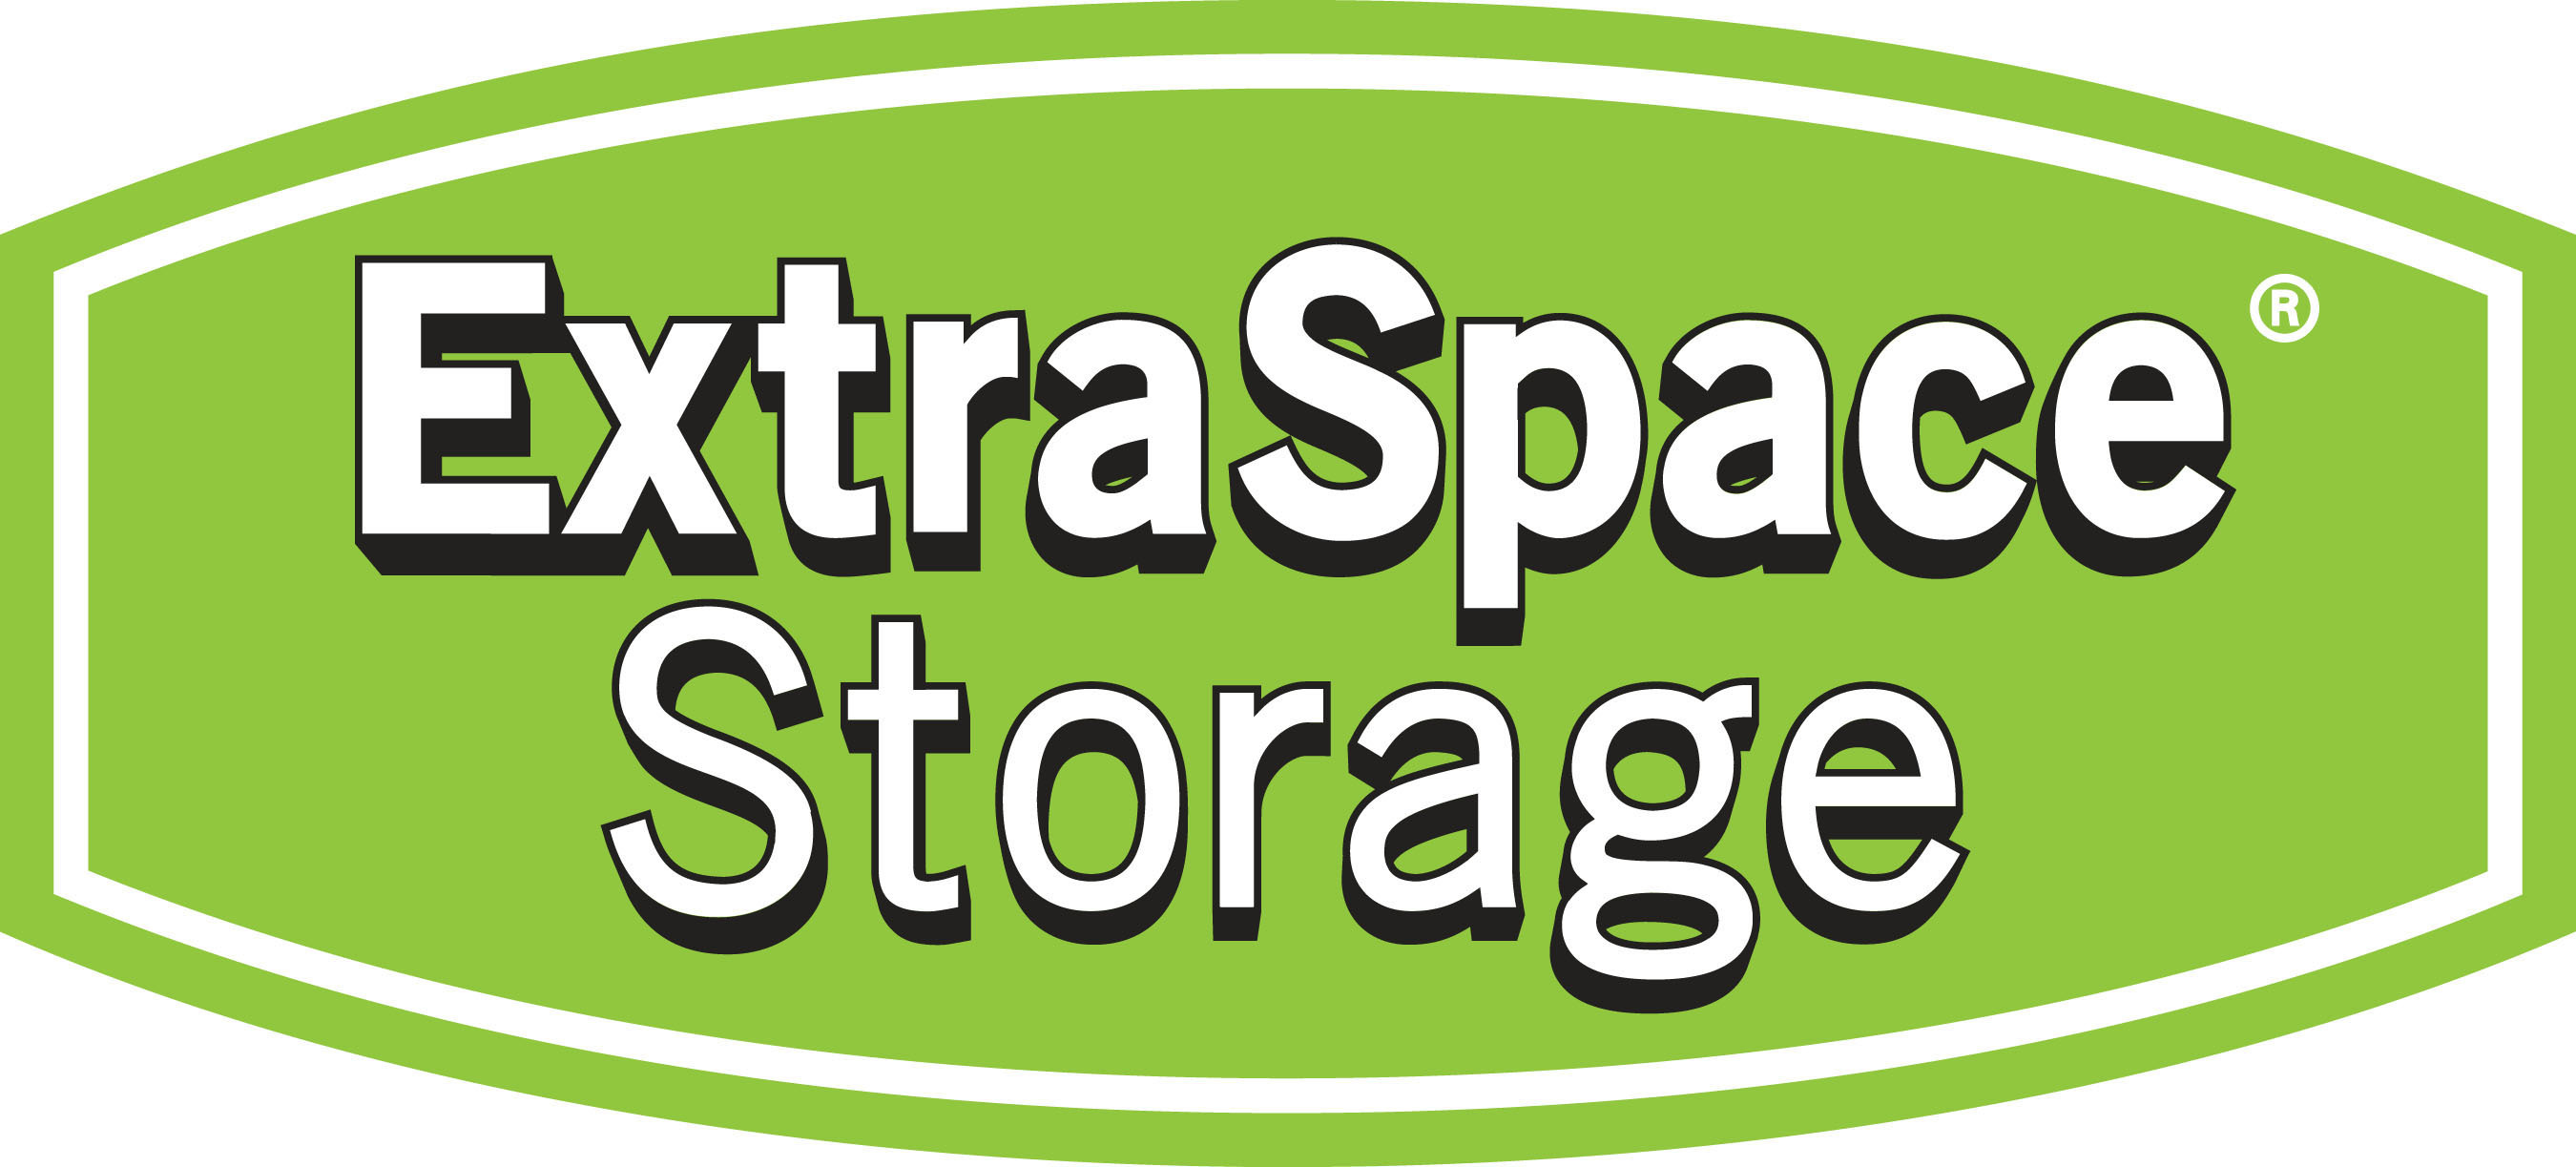 Extra Space Storage. You deserve some extra space!